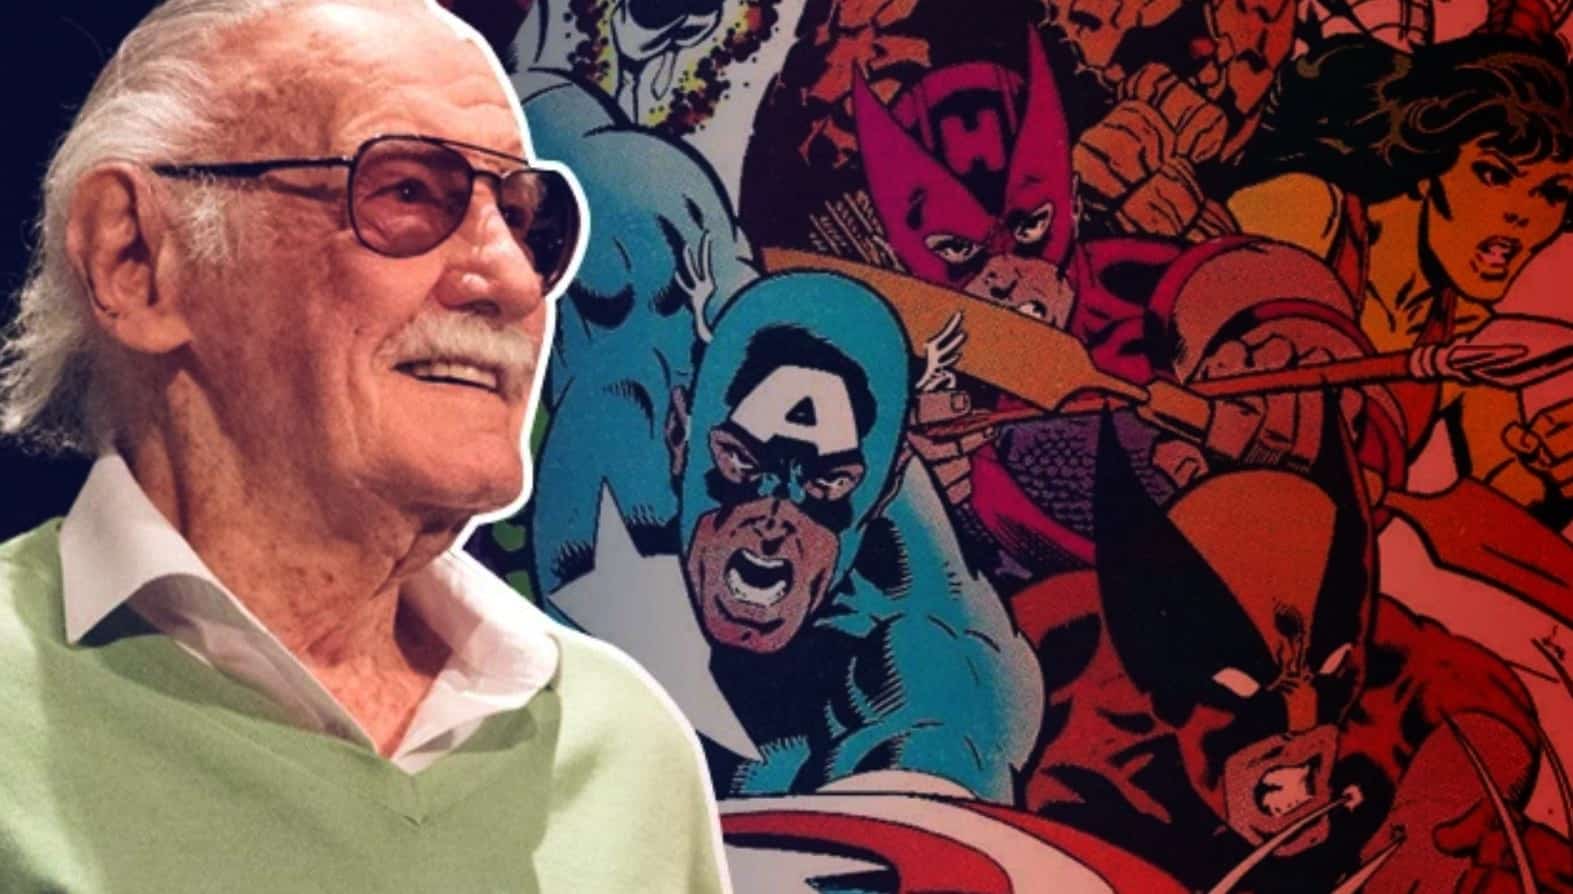 Stan Lee helped create several Marvel superheroes, villains and supporting characters that fans have grown to love and admire today